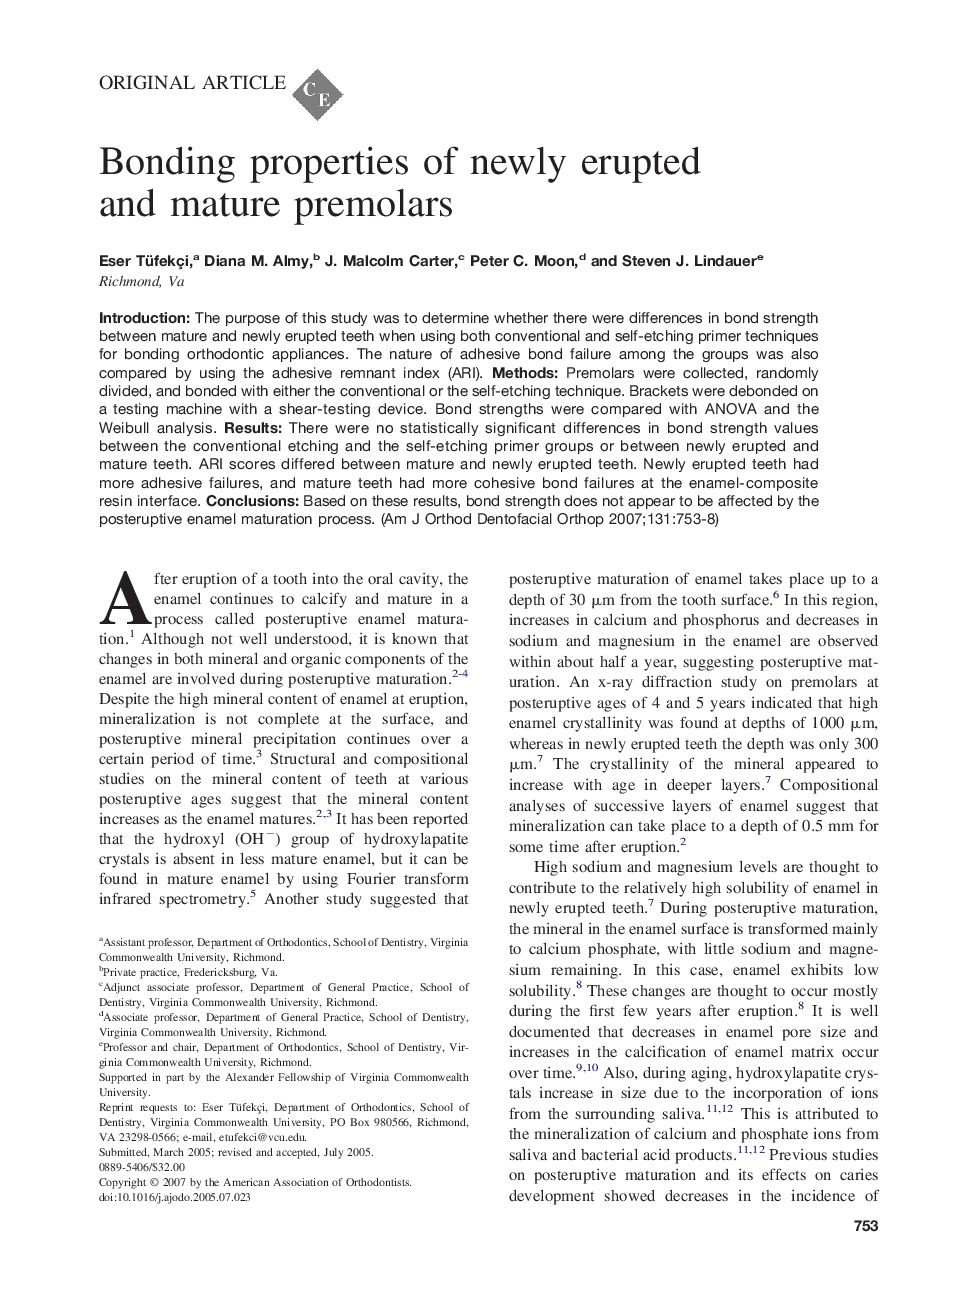 Bonding properties of newly erupted and mature premolars